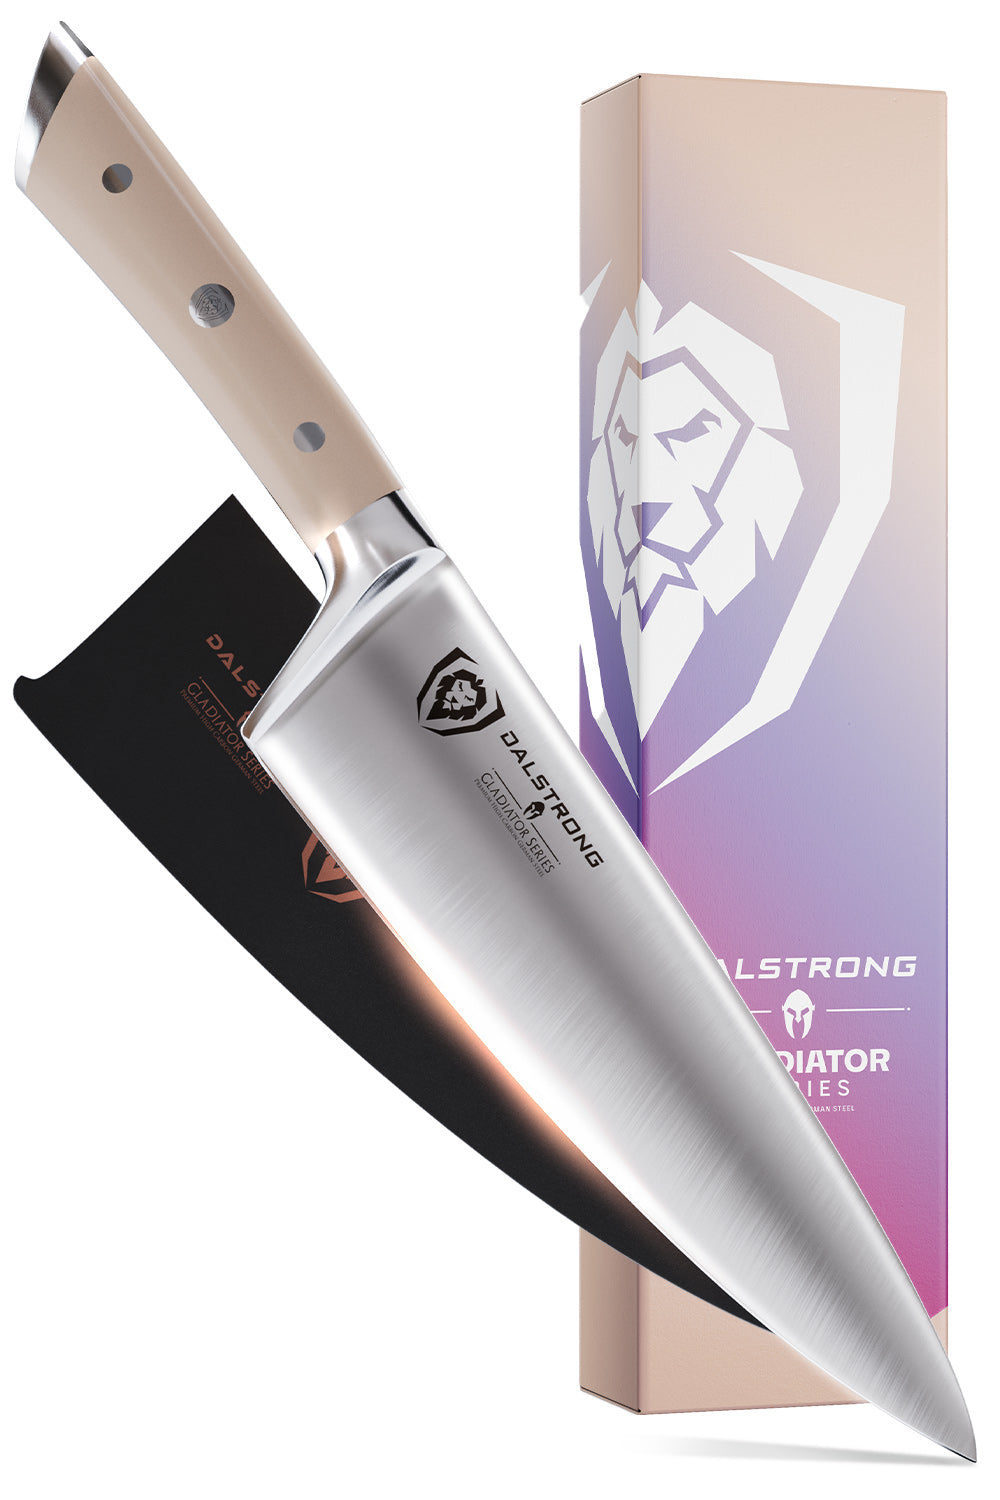 Dalstrong gladiator series 8 inch chef knife with peach handle in front of it's premium packaging.